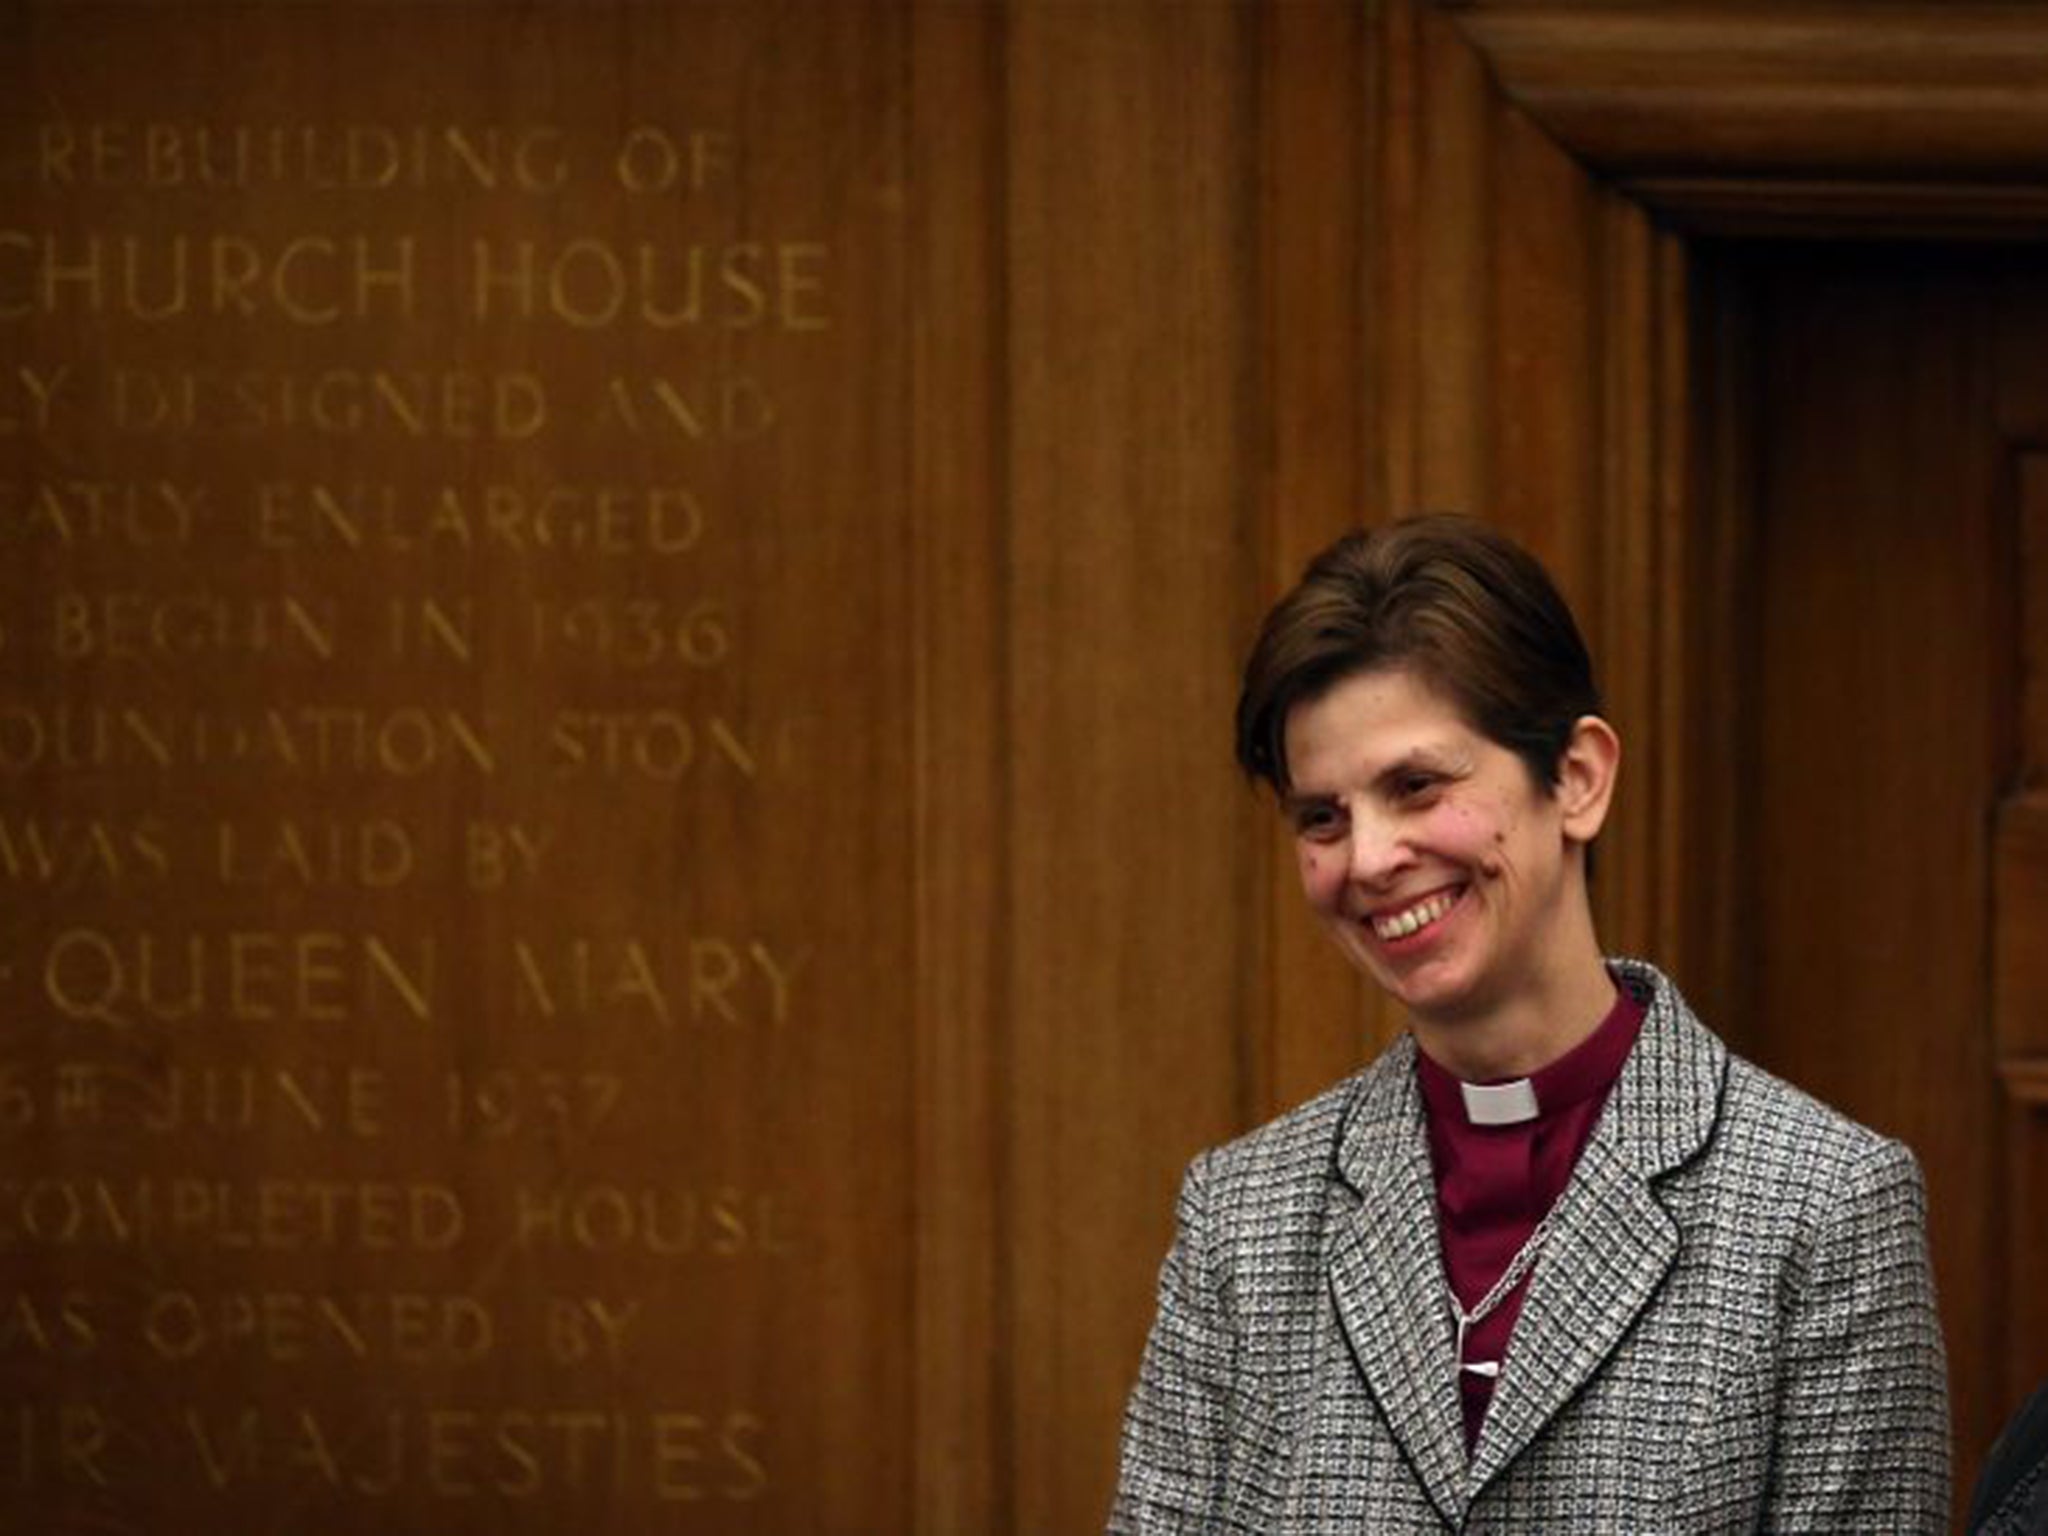 The Right Rev Libby Lane trained in dance for 15 years before studying theology